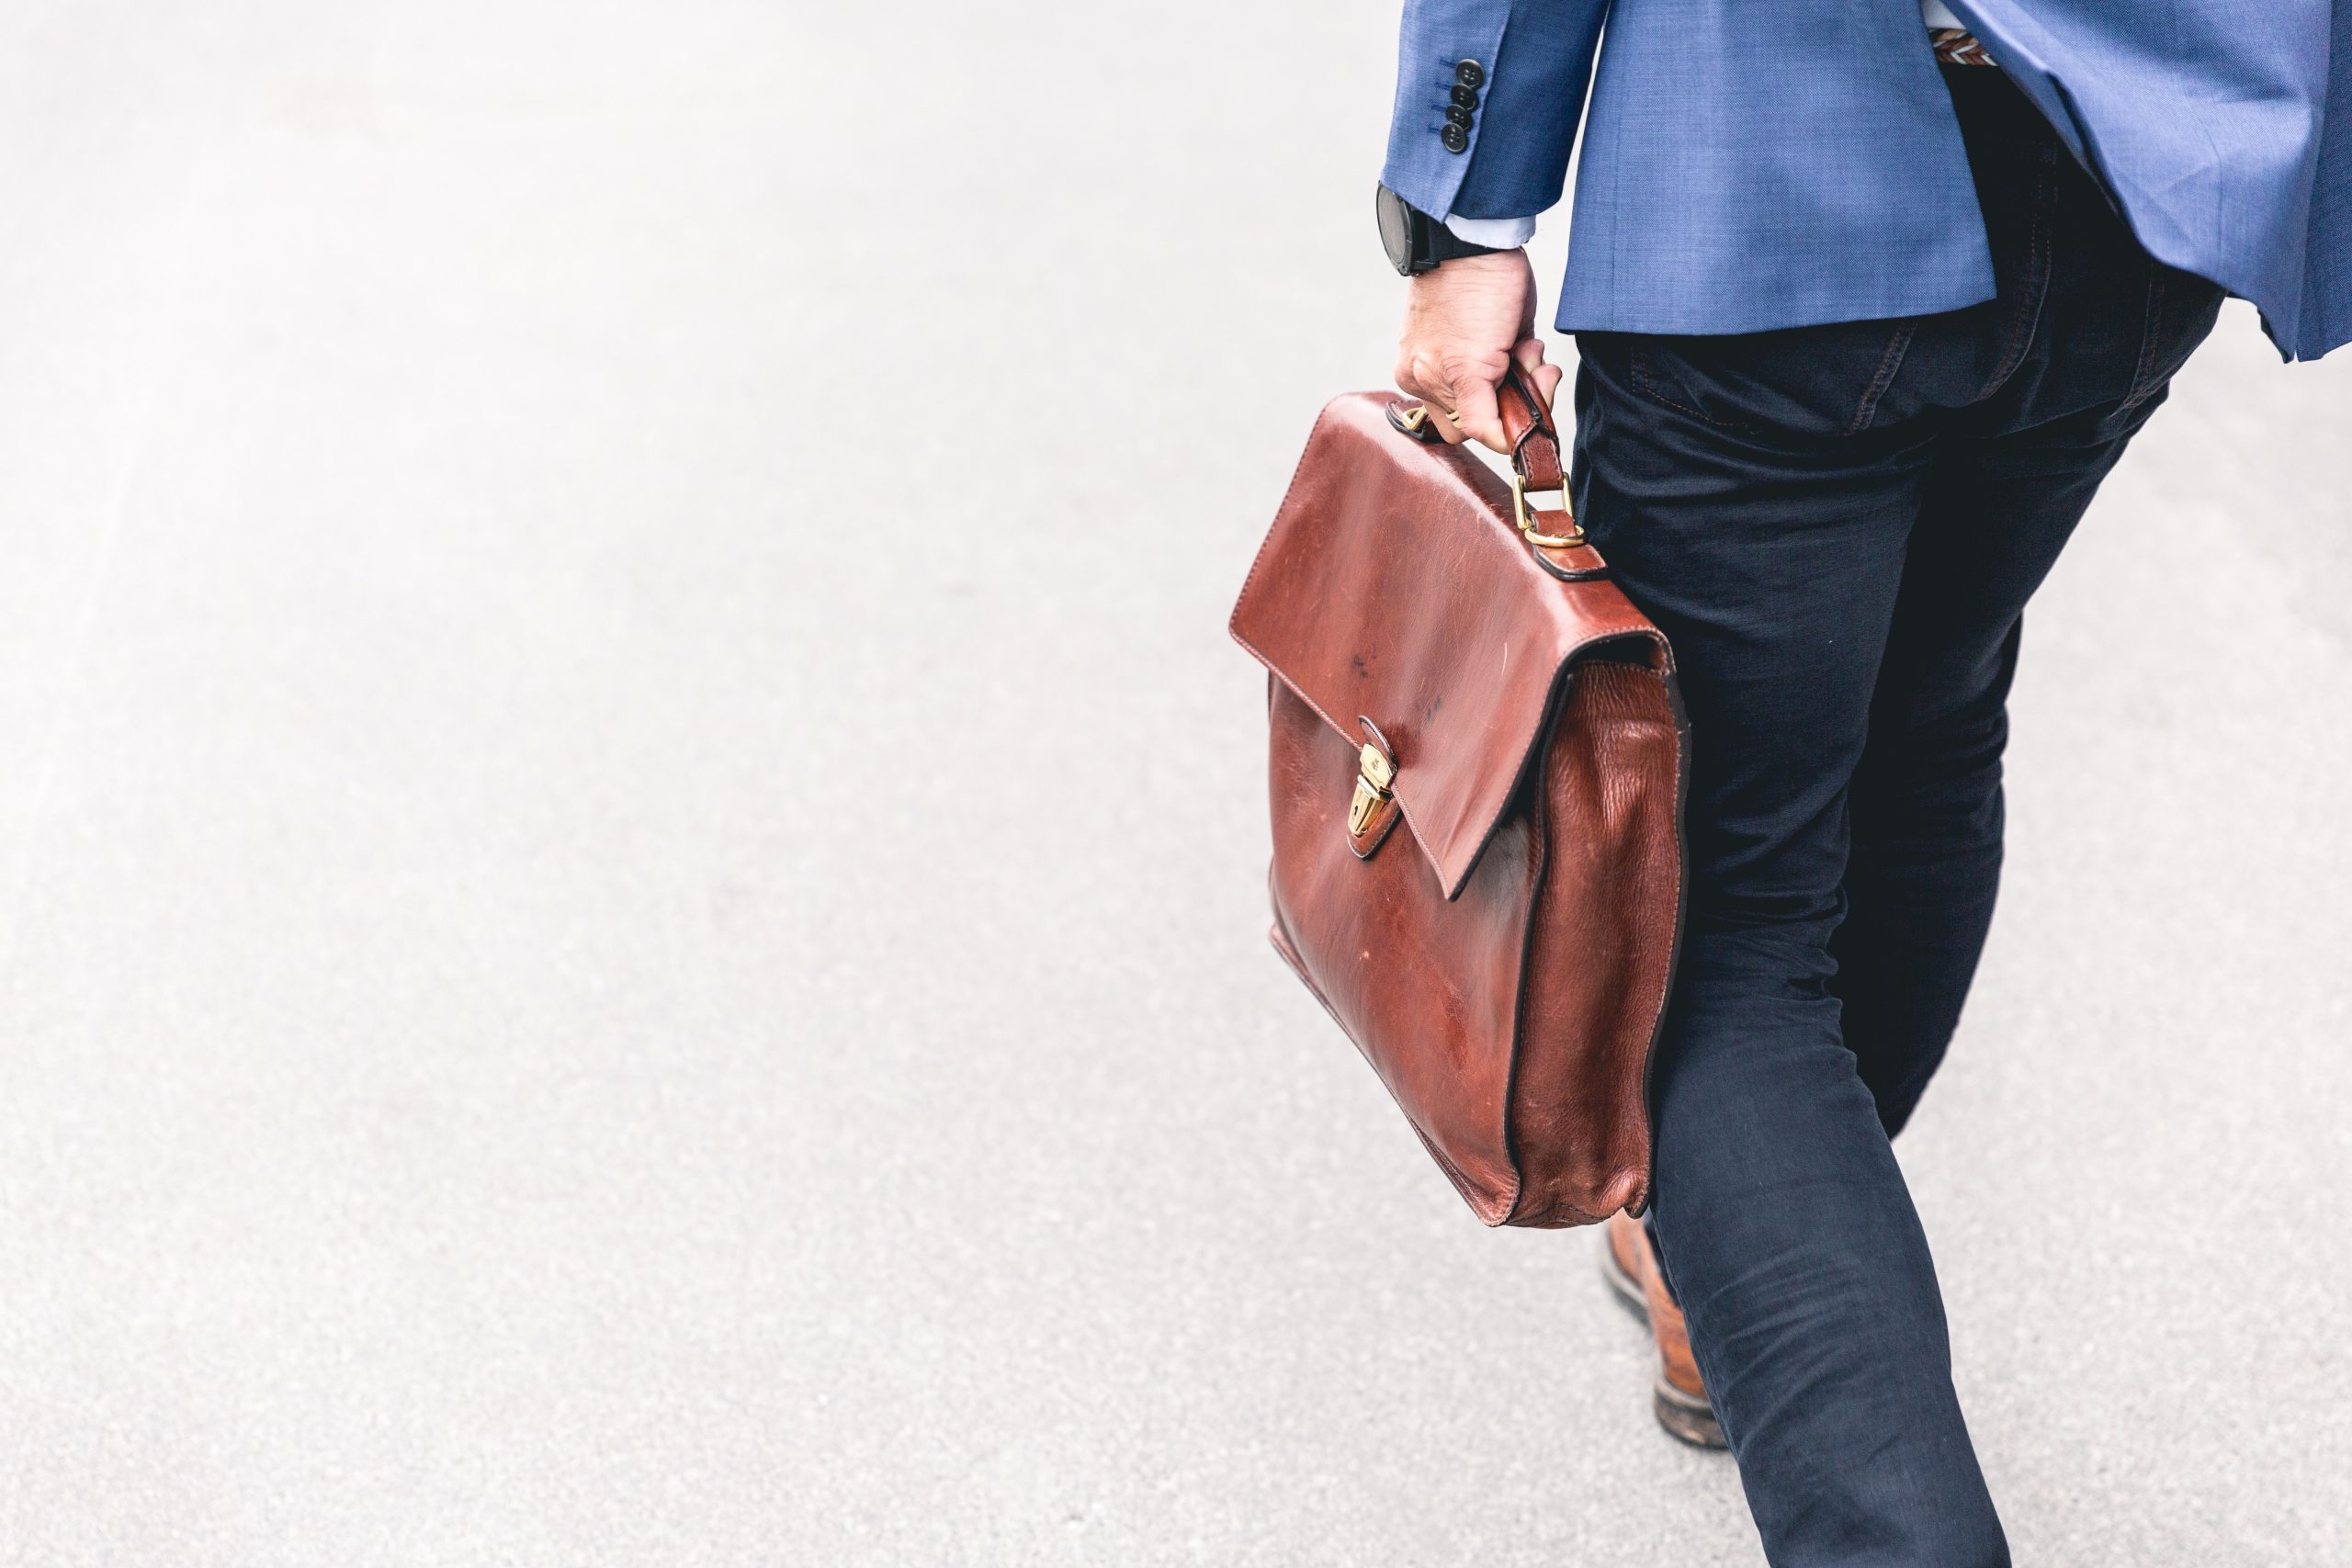 A person carrying a brown handbag on their way to work